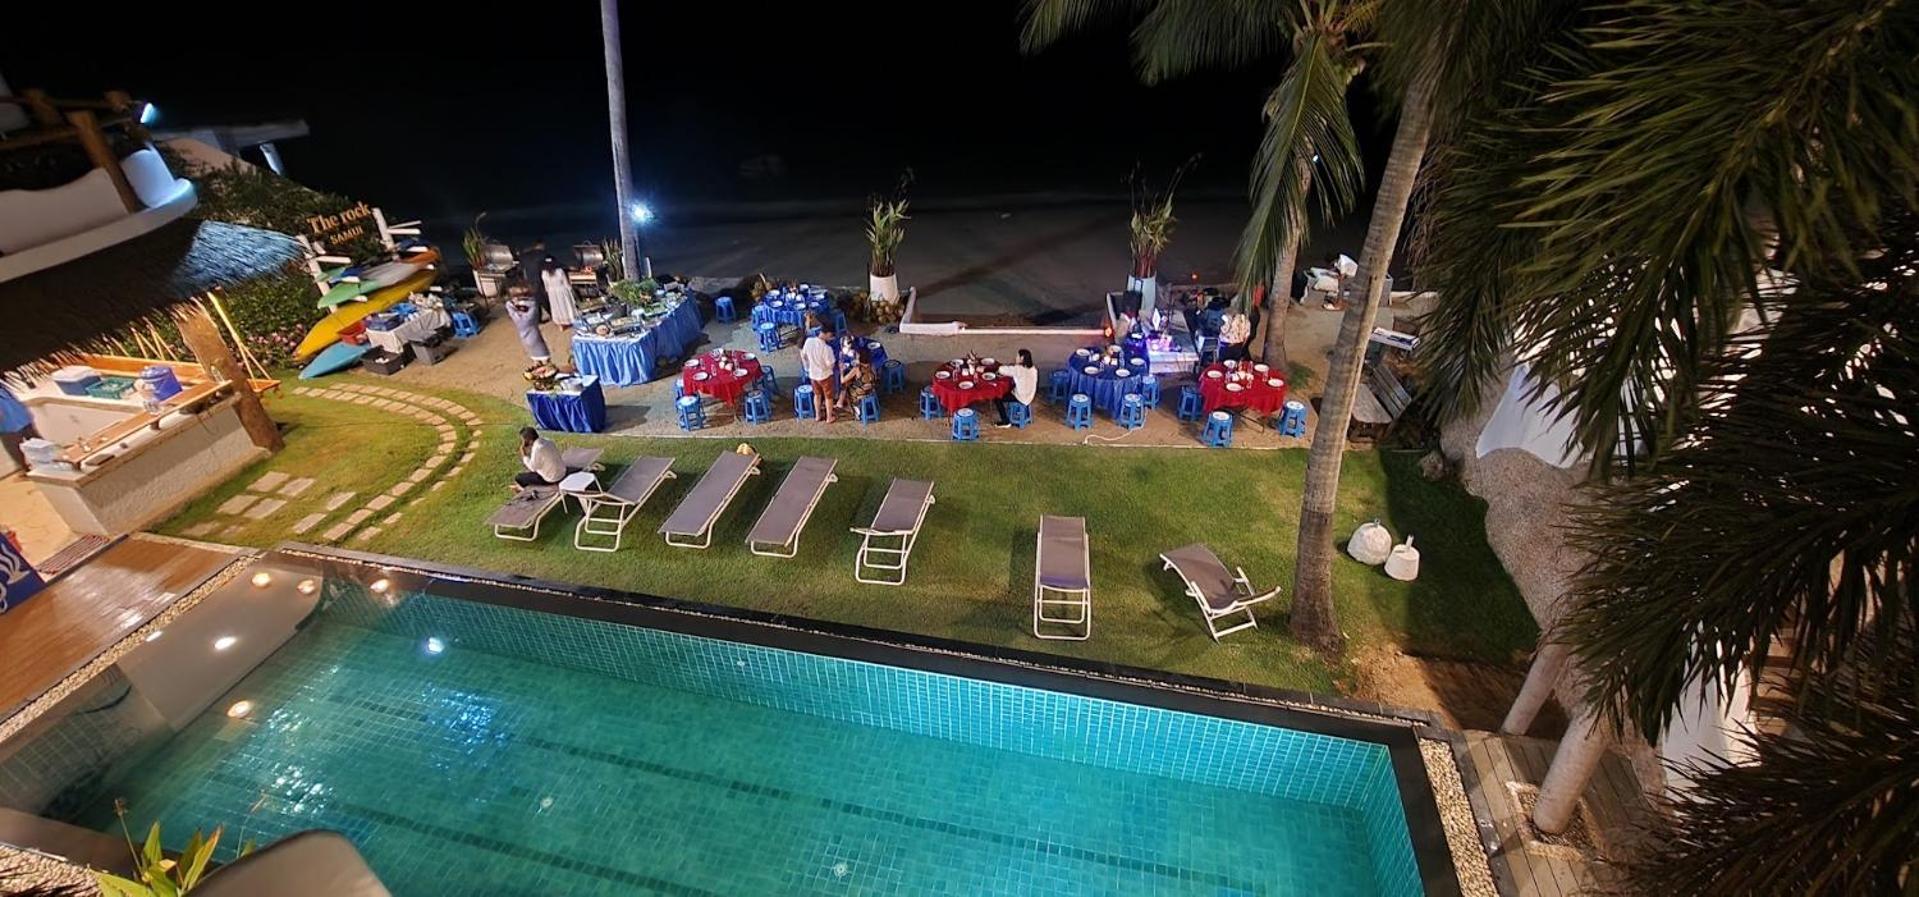 The Rock Samui - Formerly Known As The Rock Residence - Sha Extra Plus ラマイビーチ エクステリア 写真